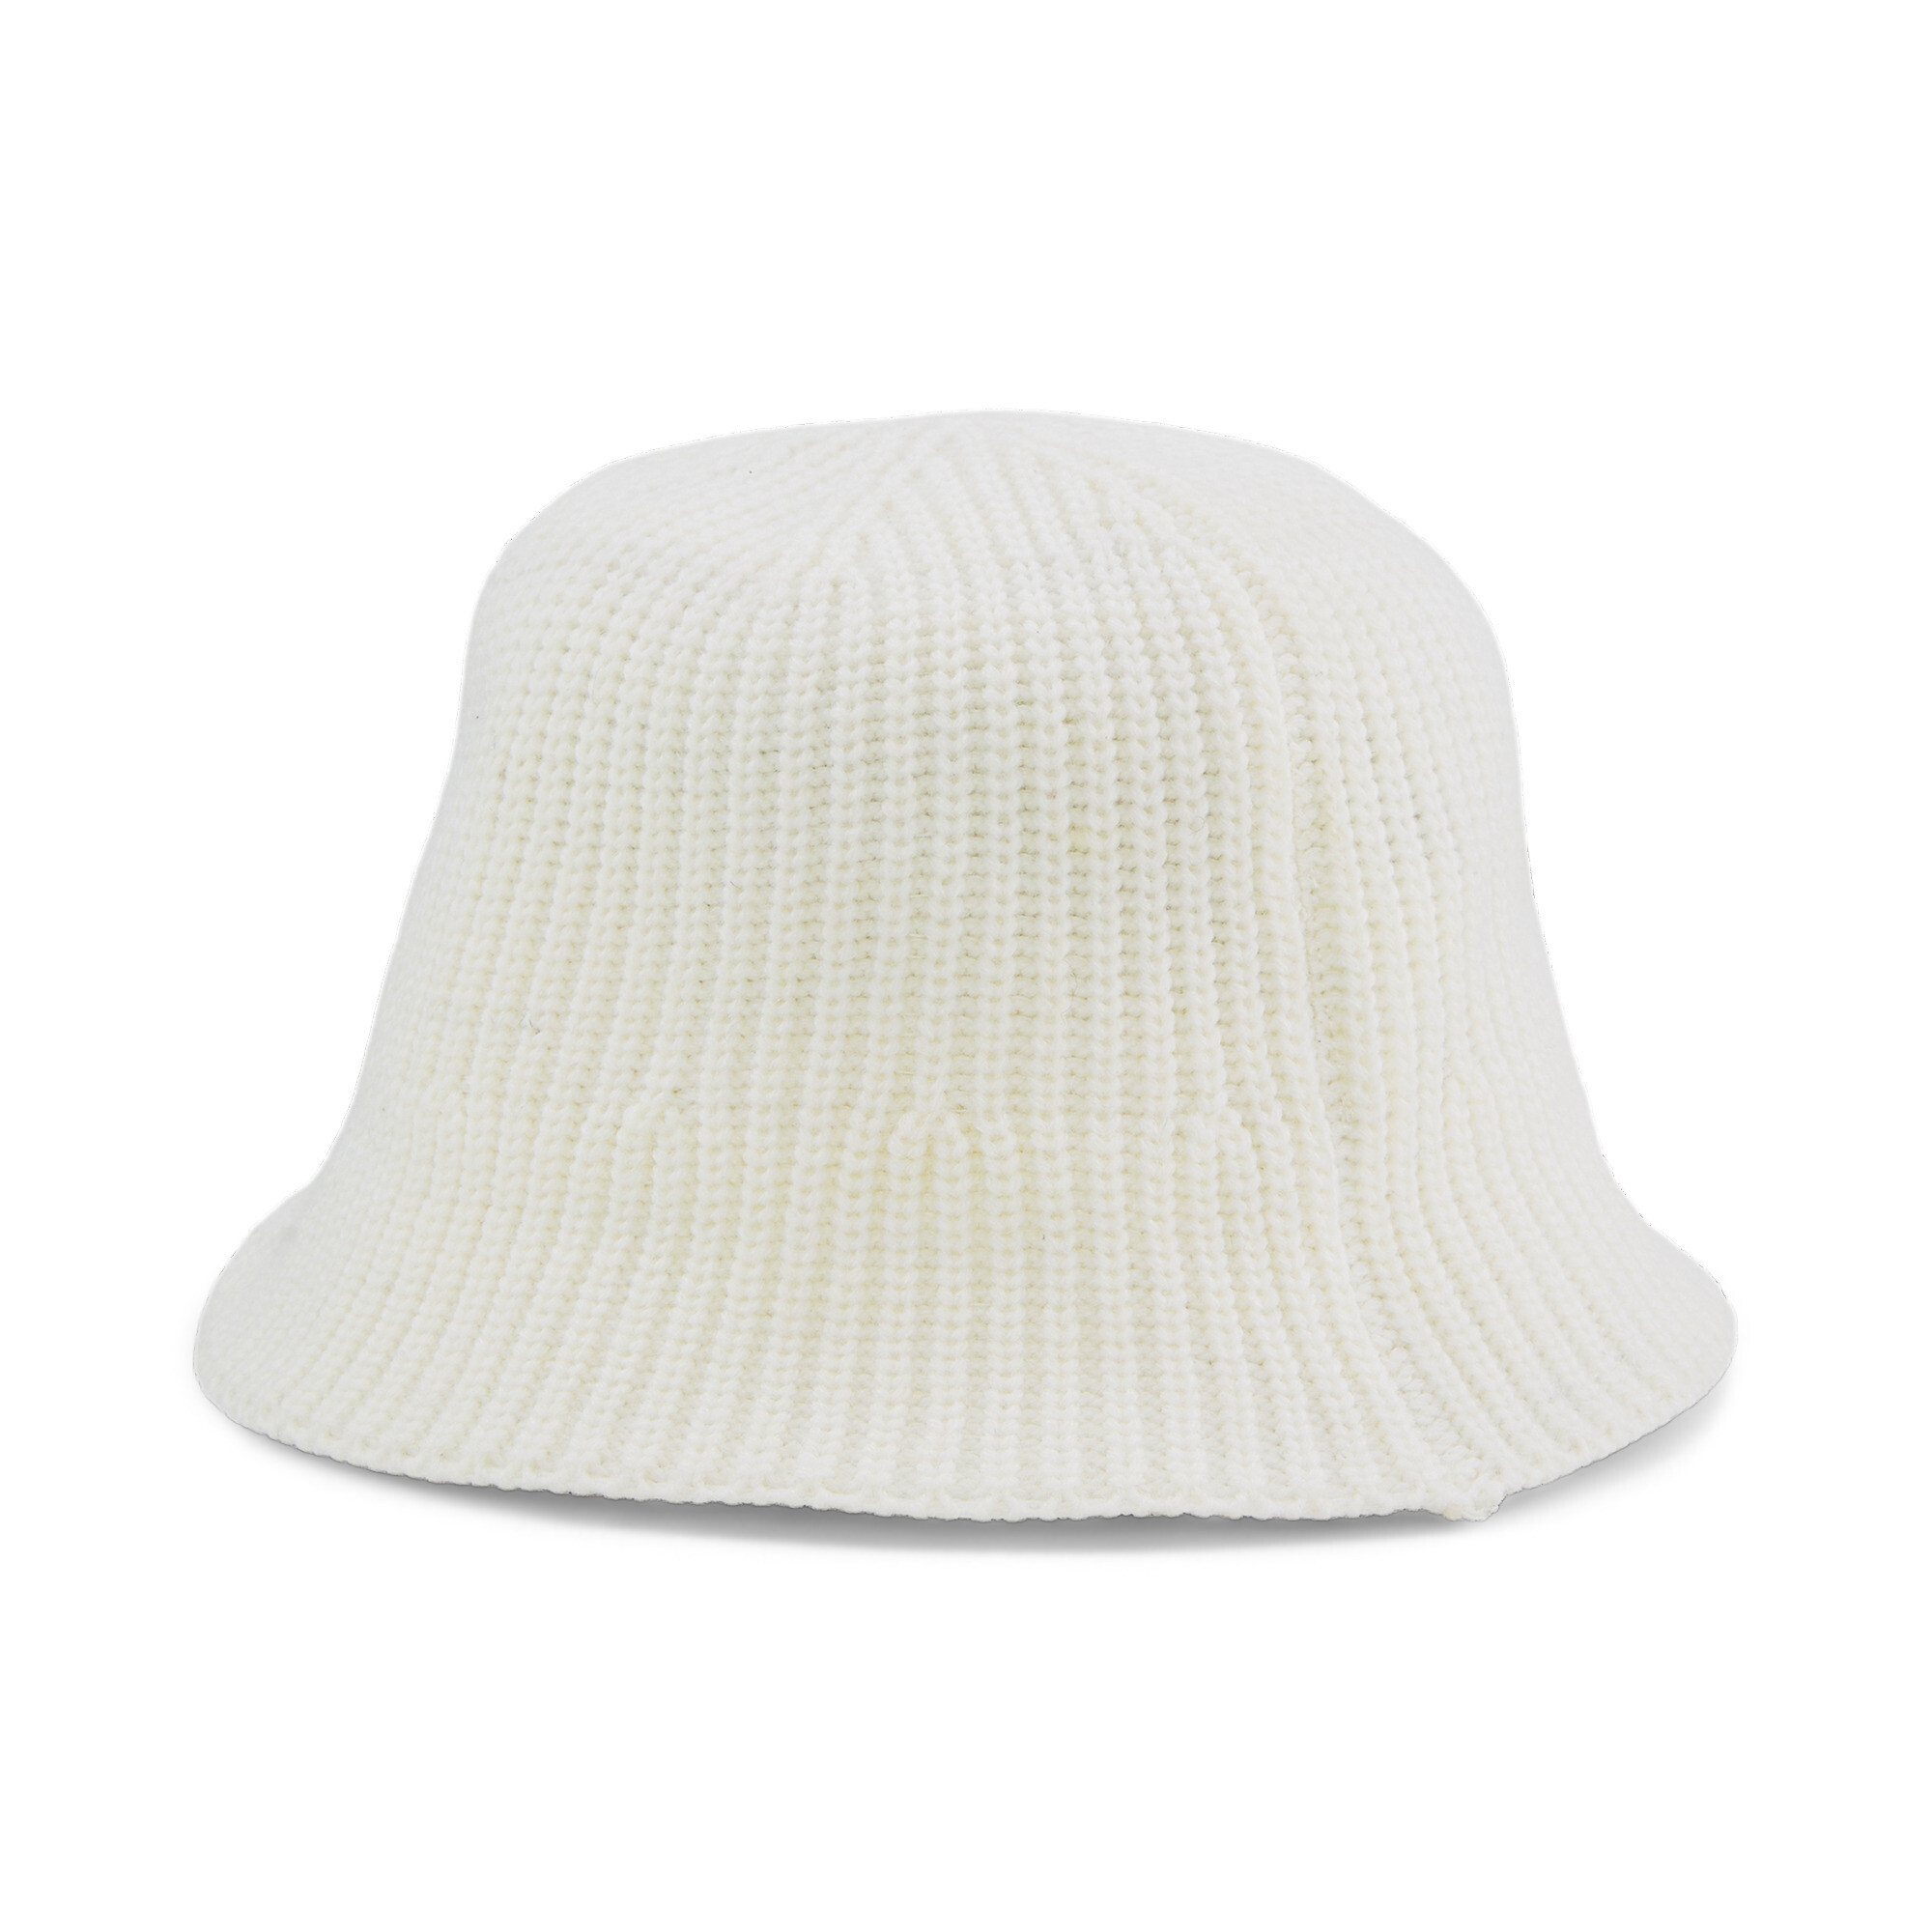 Men's PUMA PRIME Knitted Bucket Hat In White, Size Small